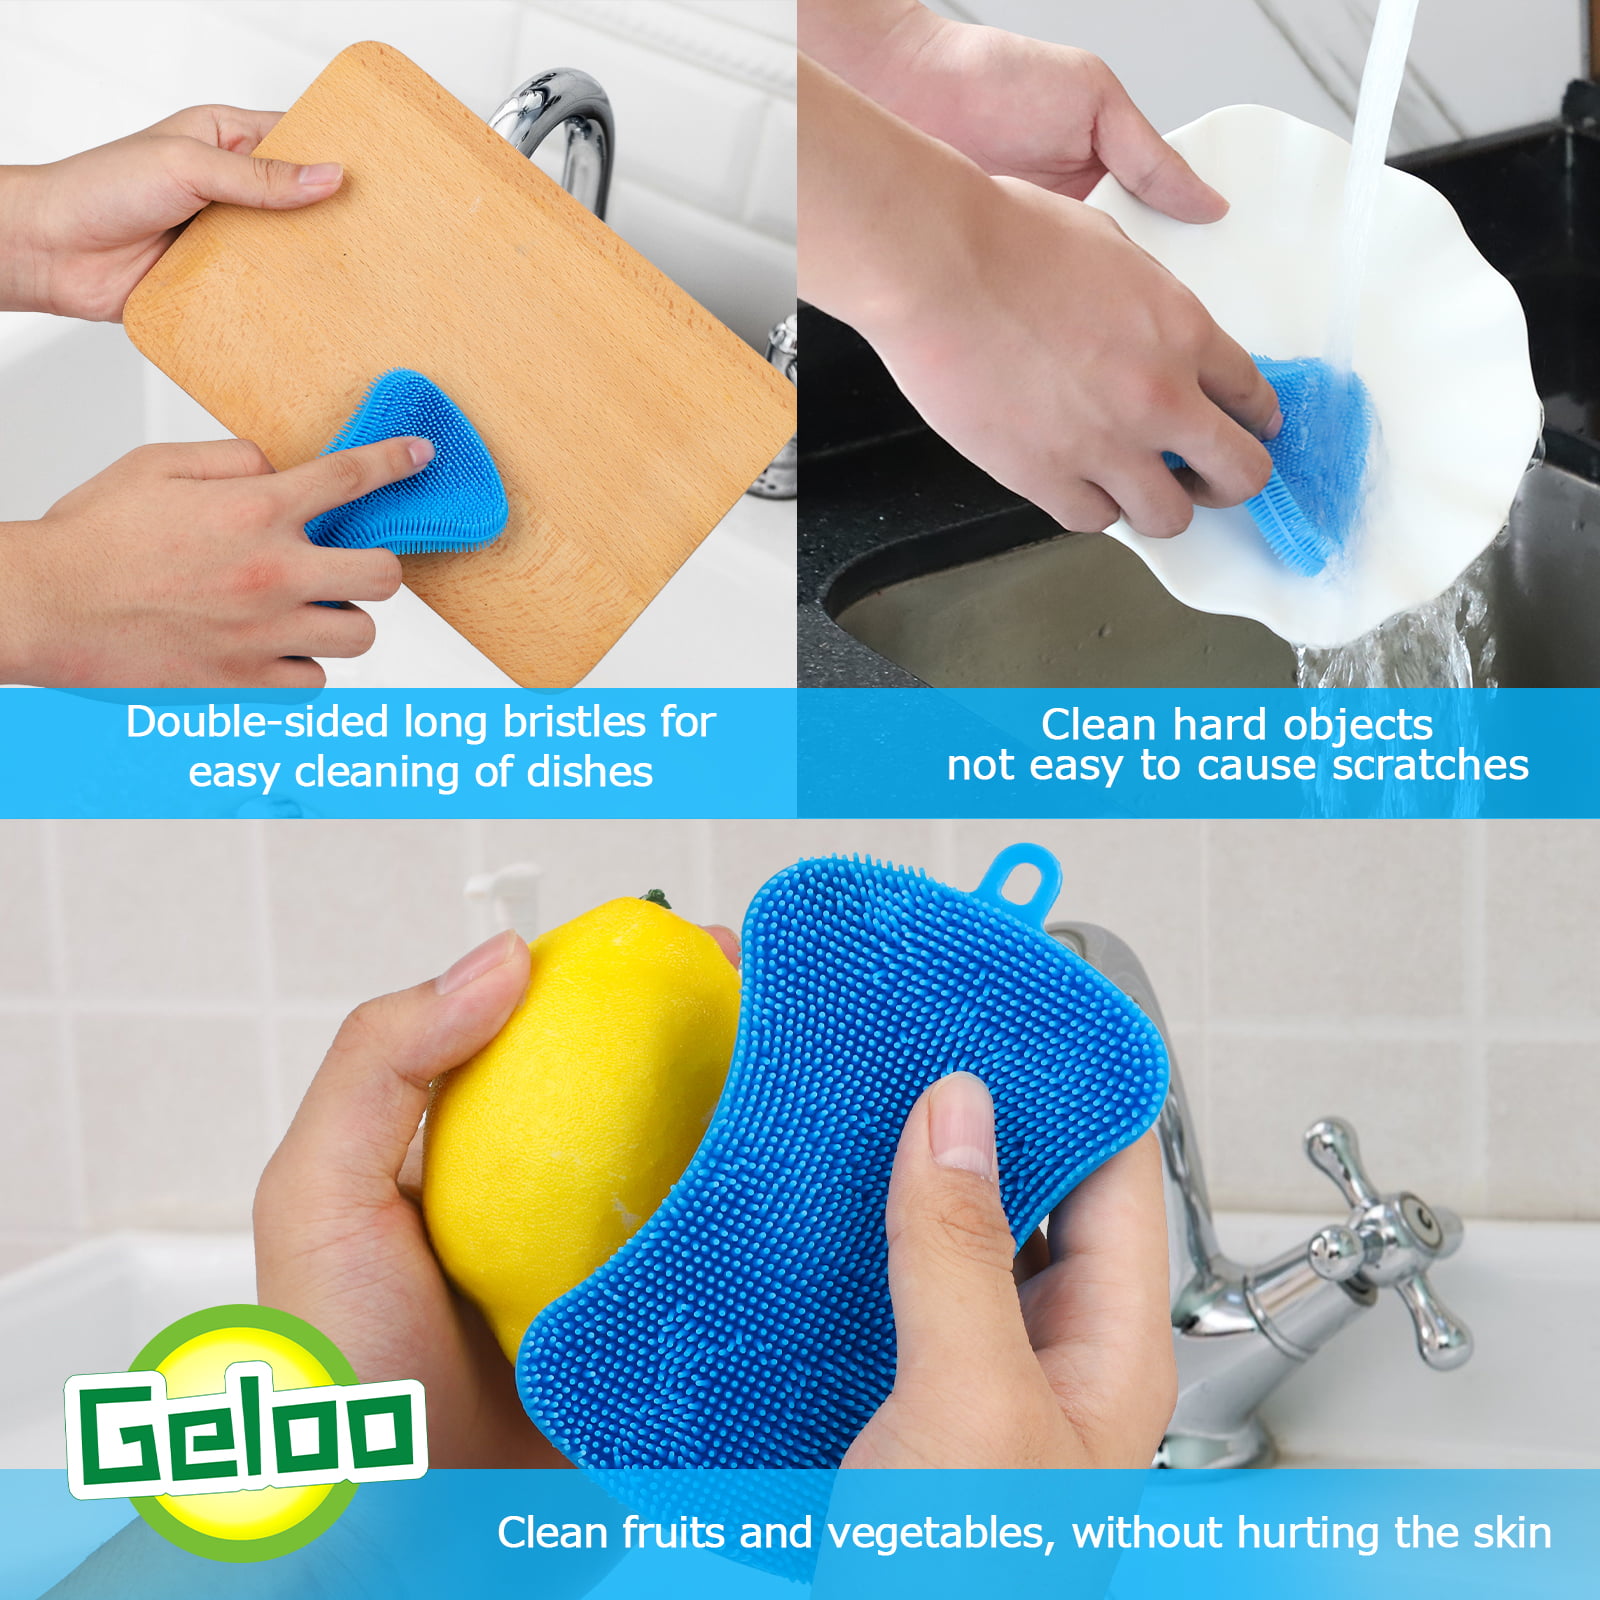 Lubrima Silicone Sponge Dish Sponges, Sponges for Cleaning Dishes, Kitchen Gadgets, 3 Scrub Sponges for Dishes Kitchen Sponges Scrubber Brush